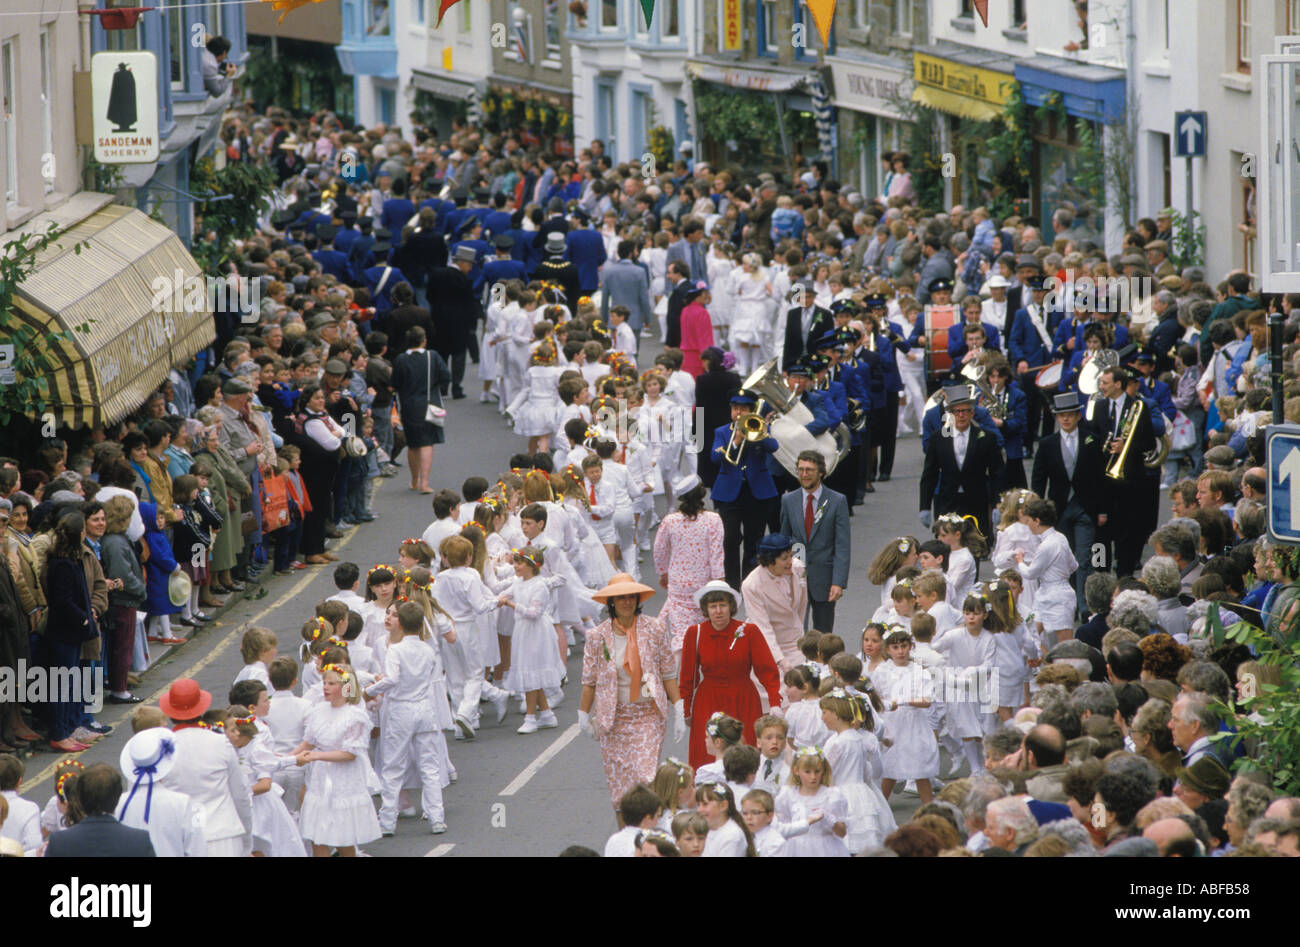 Children's Dance at the Helston Furry Dance Flora Dance Day, Takes place annually  on May 8th 1989 1980s UK England HOMER SYKES Stock Photo